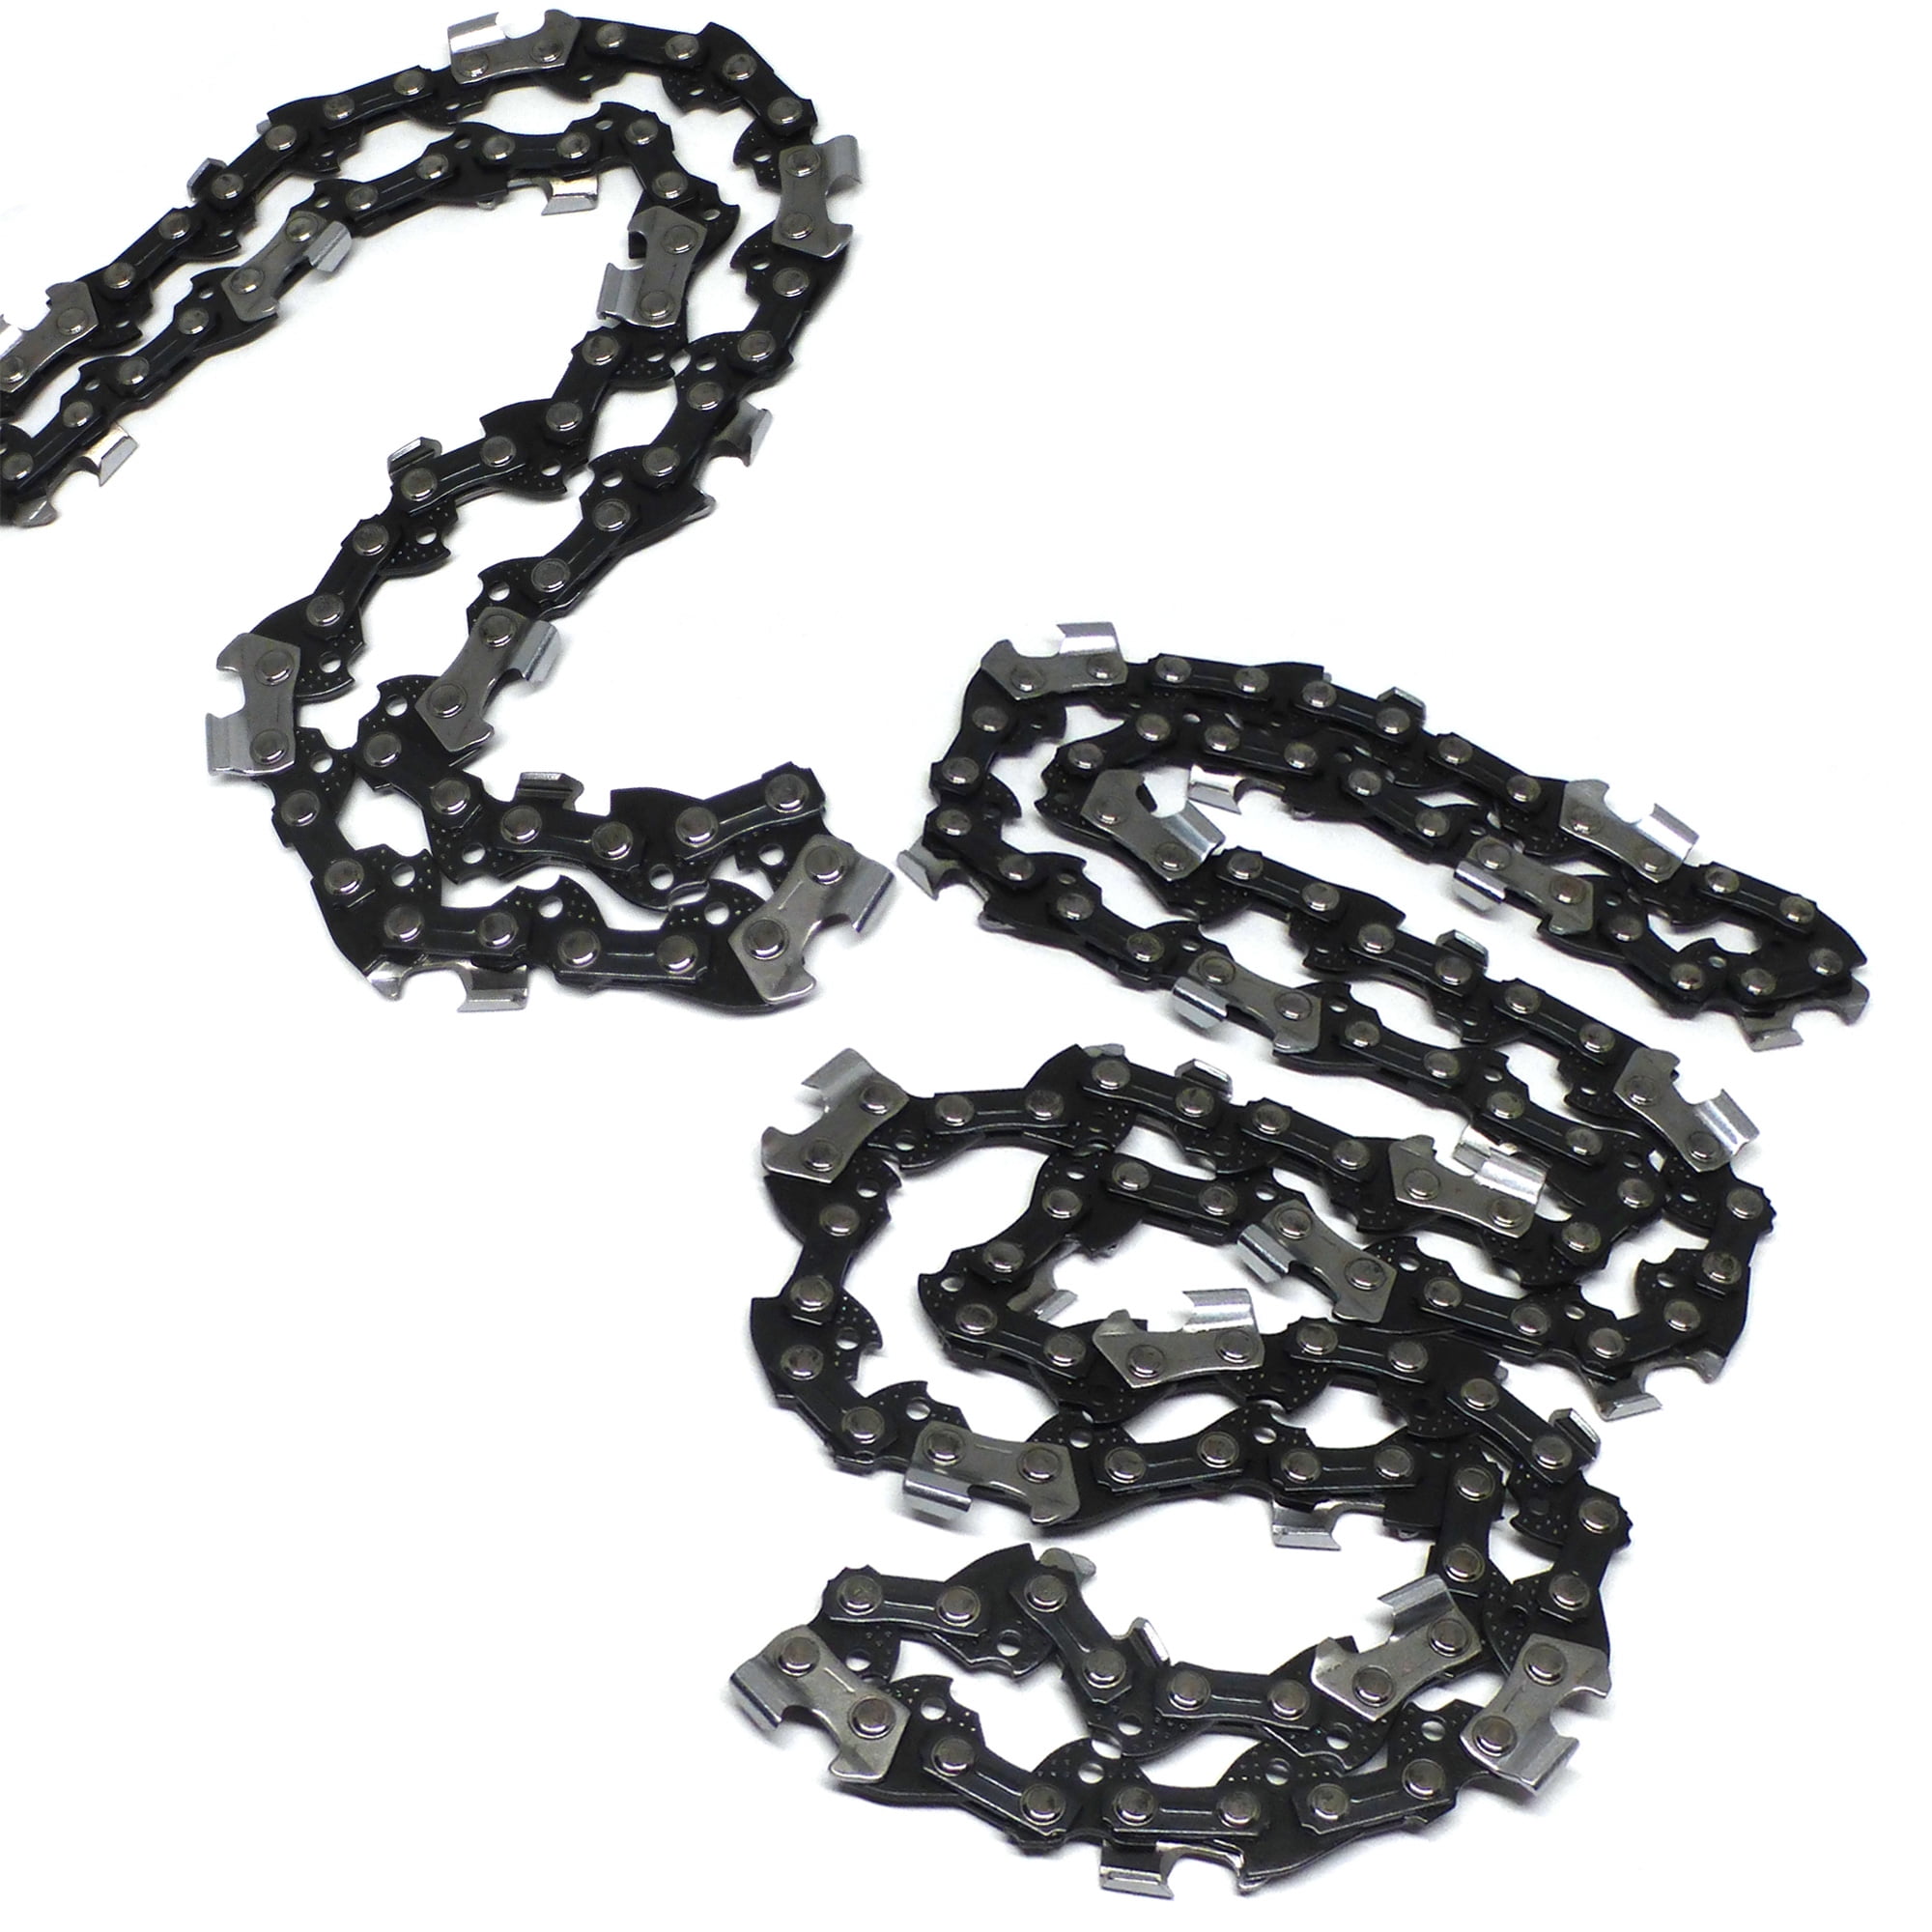 16" Chainsaw Saw Chain  Pack Of 2 Chains Fits STIHL MS180 MS181 018 020 020T 